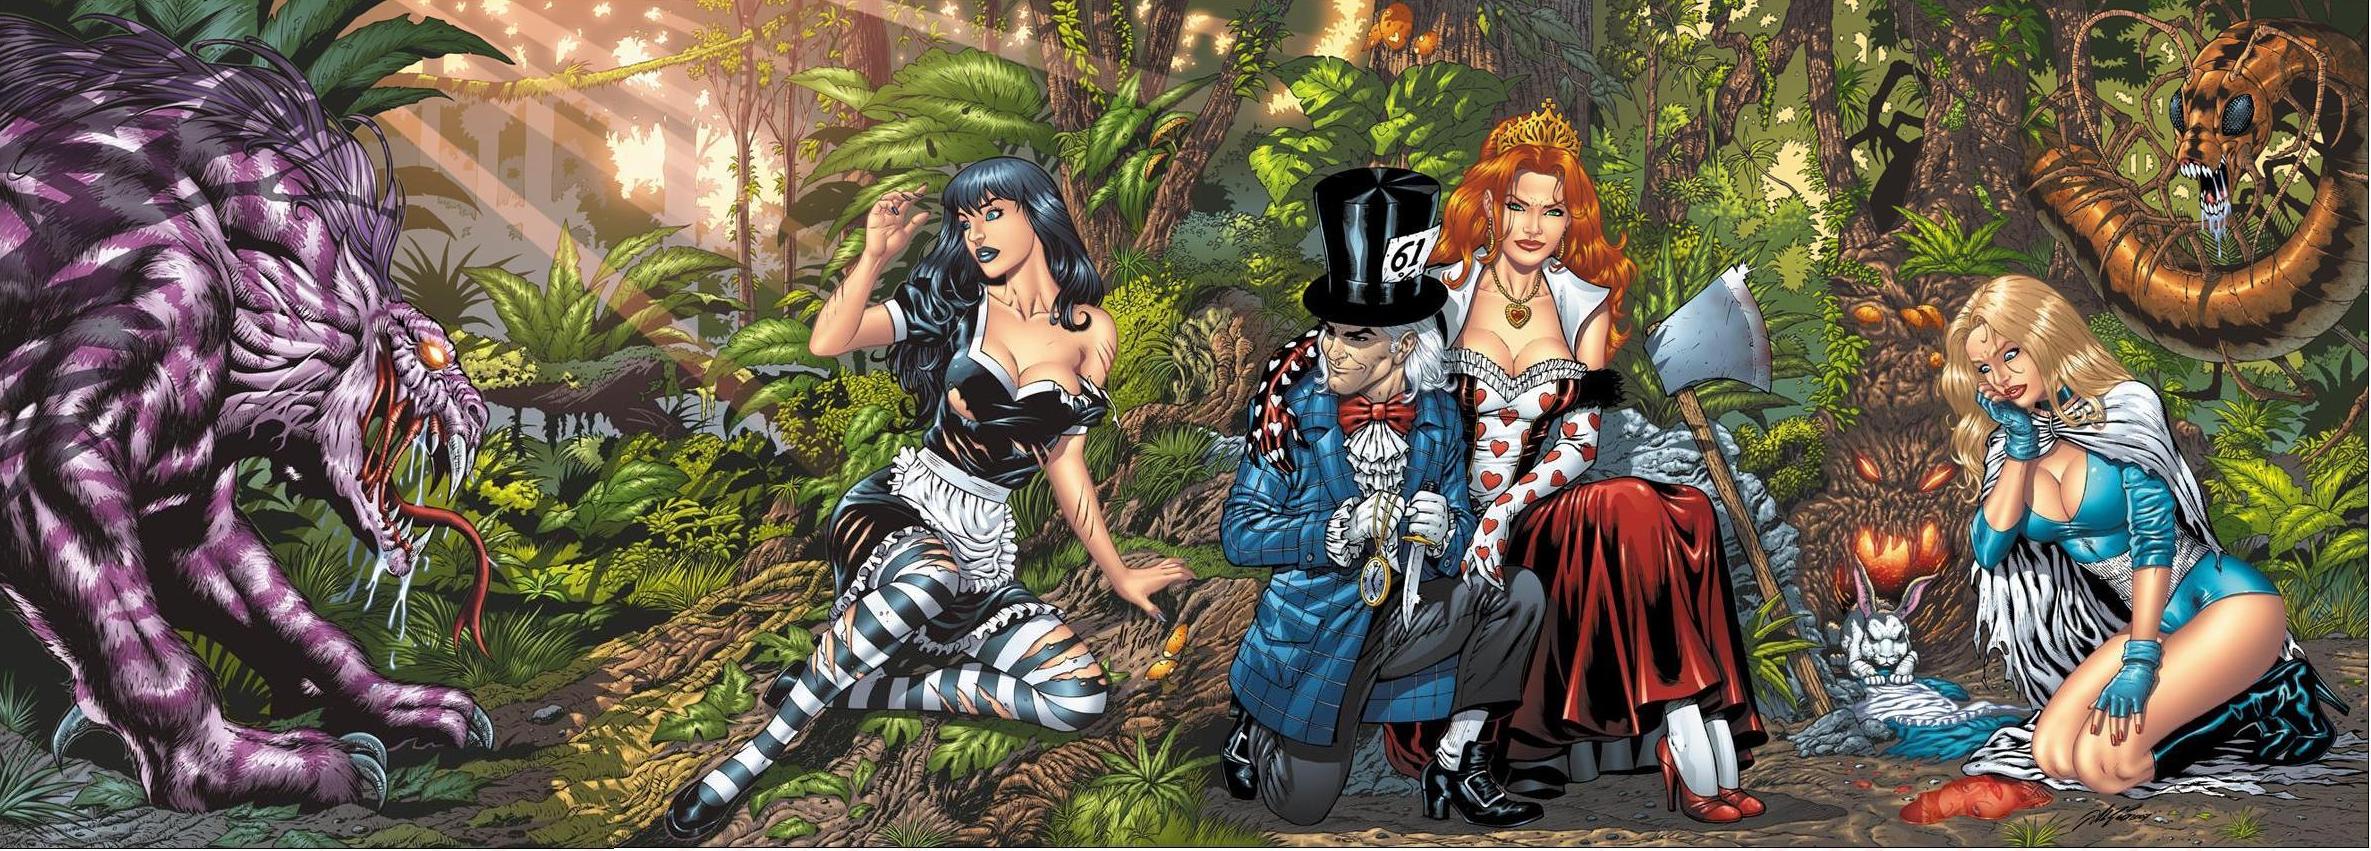 Grimm Fairy Tales: Return To Wonderland Wallpaper and Background Image ...